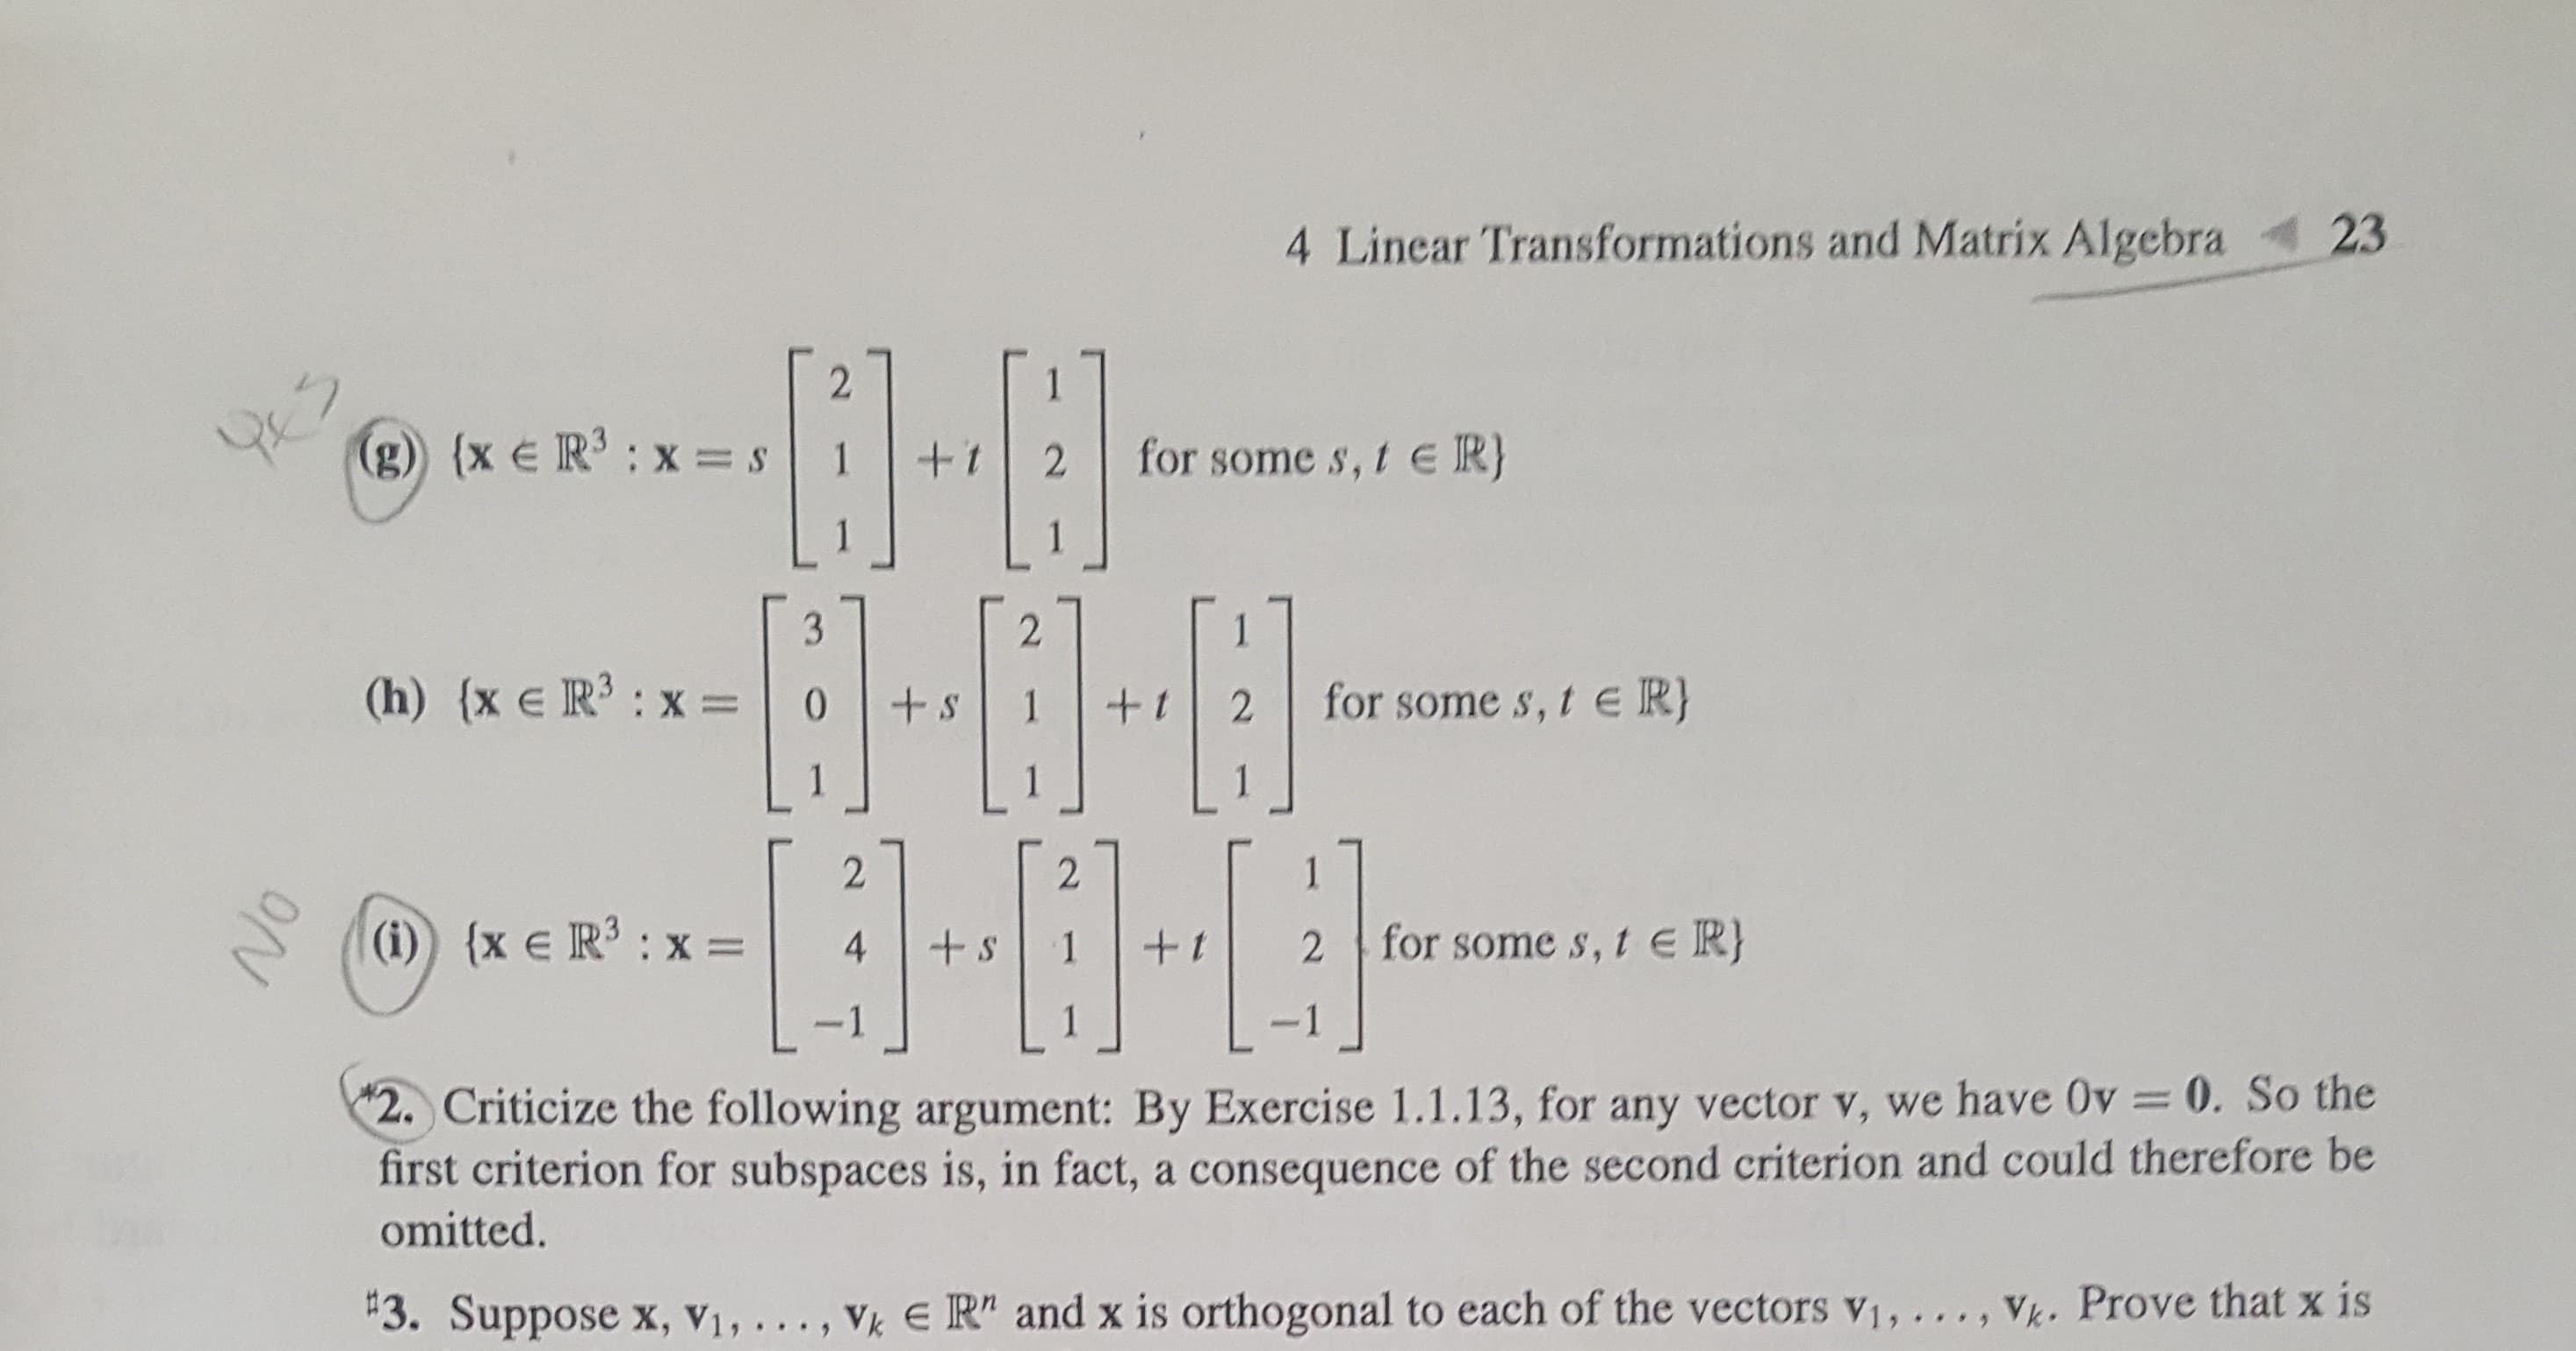 23
Linear Transformations and Matrix Algebra
2
(g) (x e R : x =s
for some s, te R}
1
+t
2
3
2
(h) (x e R3 x=
LJ
for some s,te R}
+S
0
t
2
1
2
2
1
(i) {xe R3
for some s, t e R}
+s
:X =
4
+1
2
1
-1
-1
2 Criticize the following argument: By Exercise 1.1.13, for any vector v, we have Ov 0. So the
first criterion for subspaces is, in fact, a consequence of the second criterion and could therefore be
omitted.
#3. Suppose x, V1,.
Vk E R" and x is orthogonal to each of the vectors v1, ... , Vk. Prove that x is
NO
